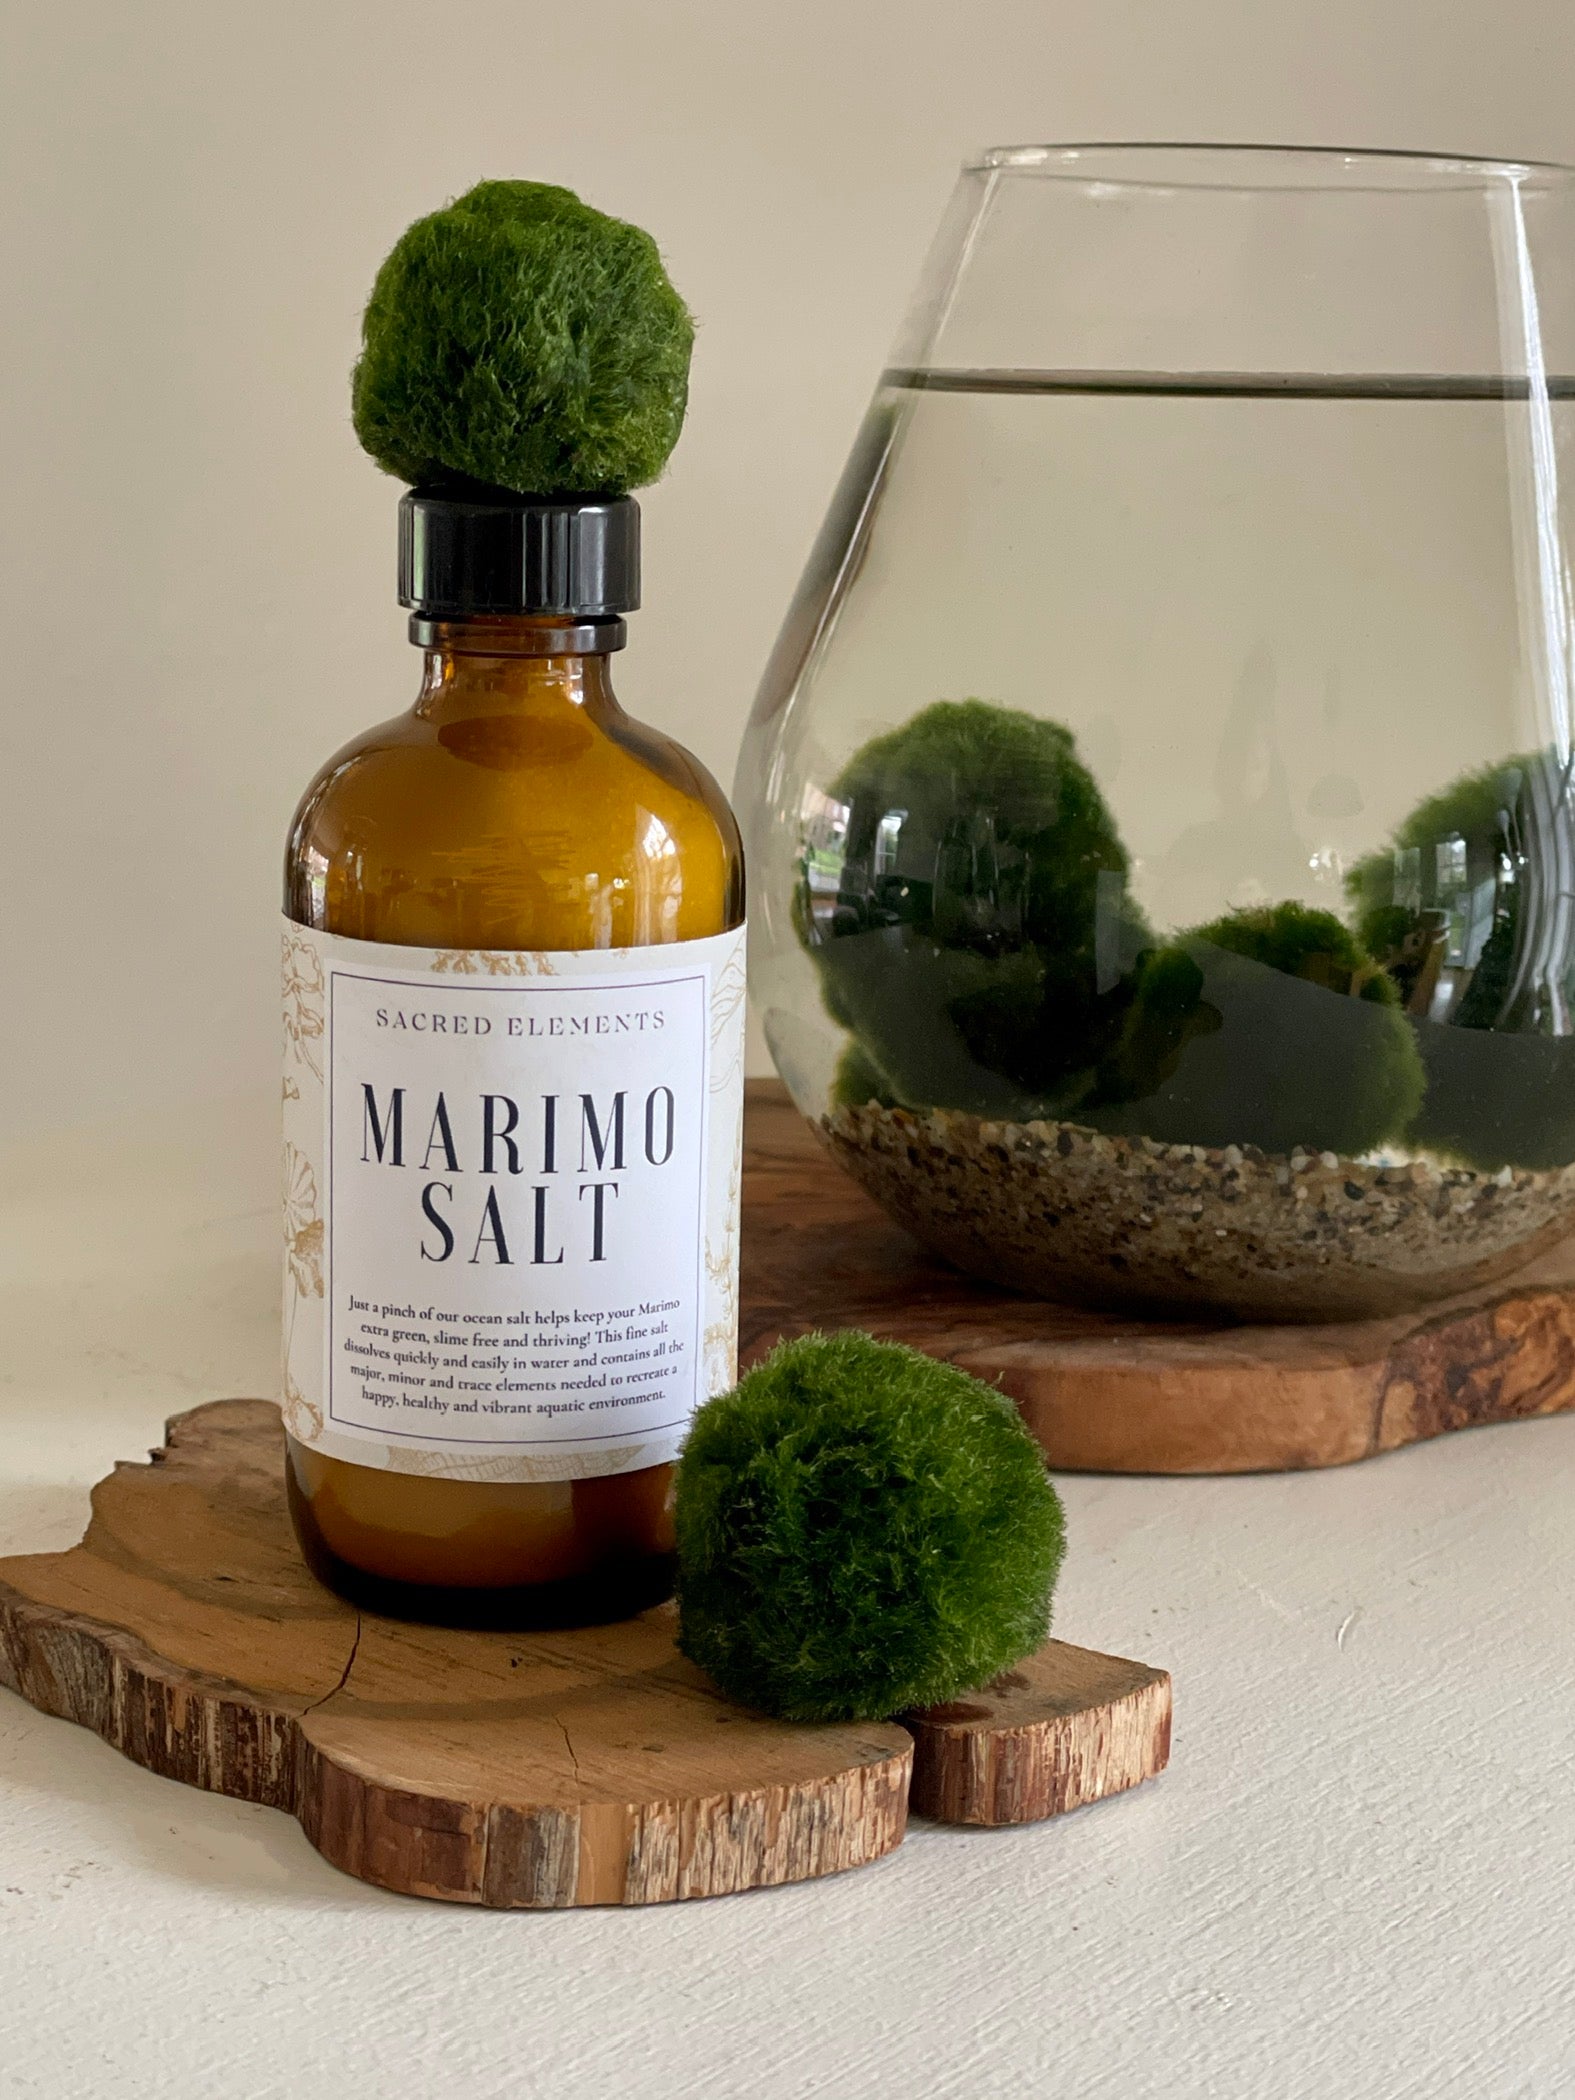 What Are Marimo Moss Balls?